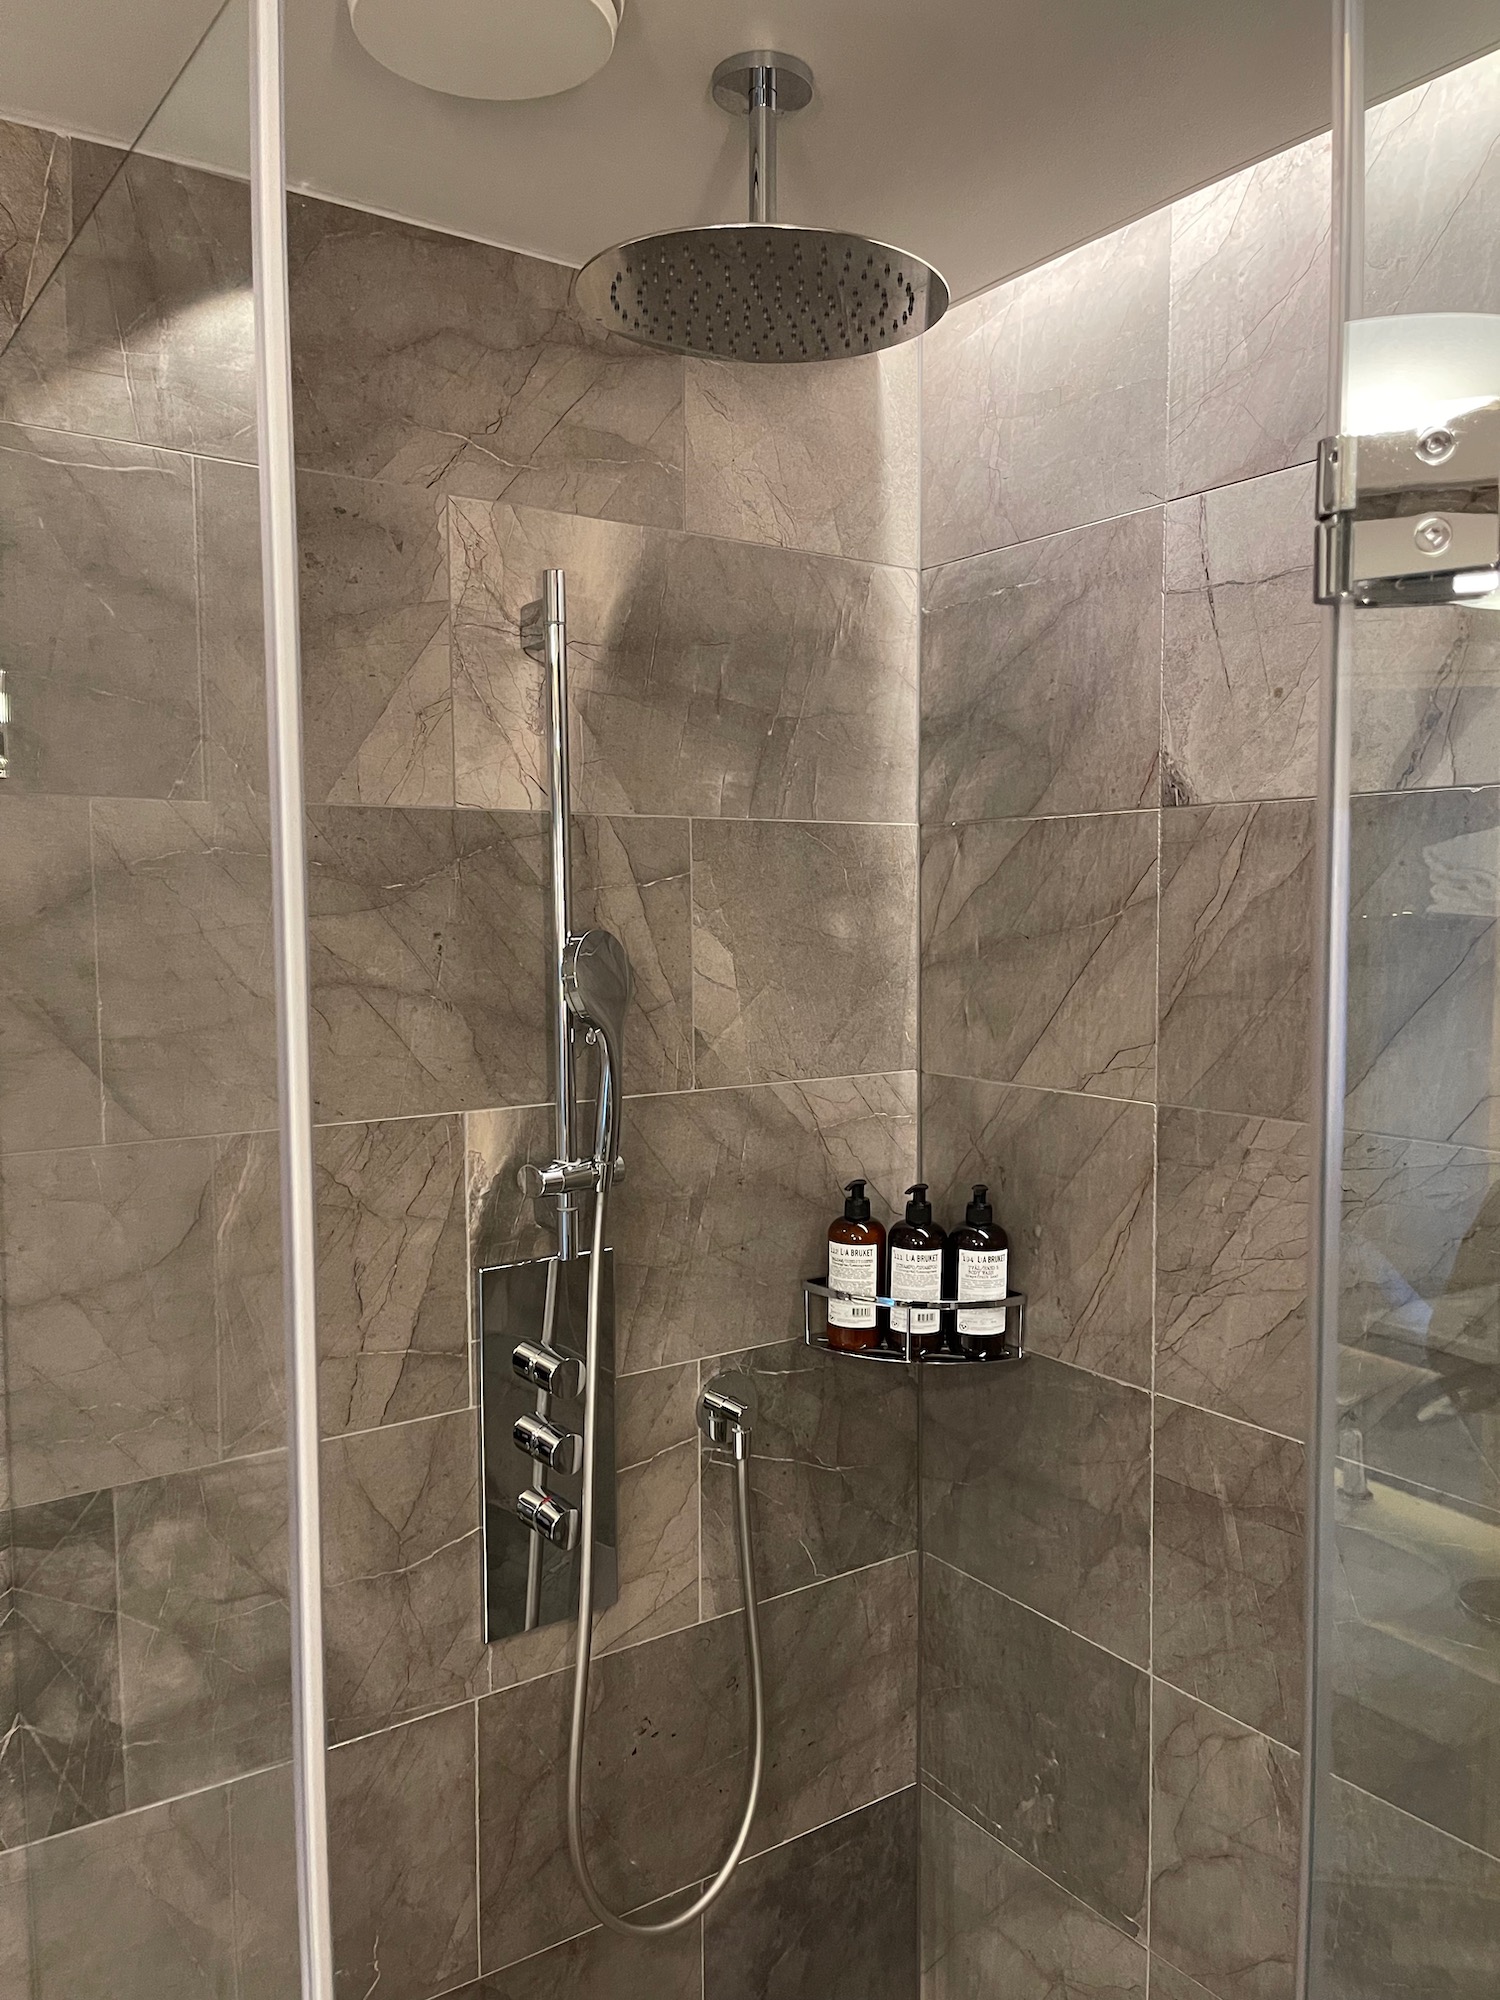 a shower with a shower head and bottles of essential oils